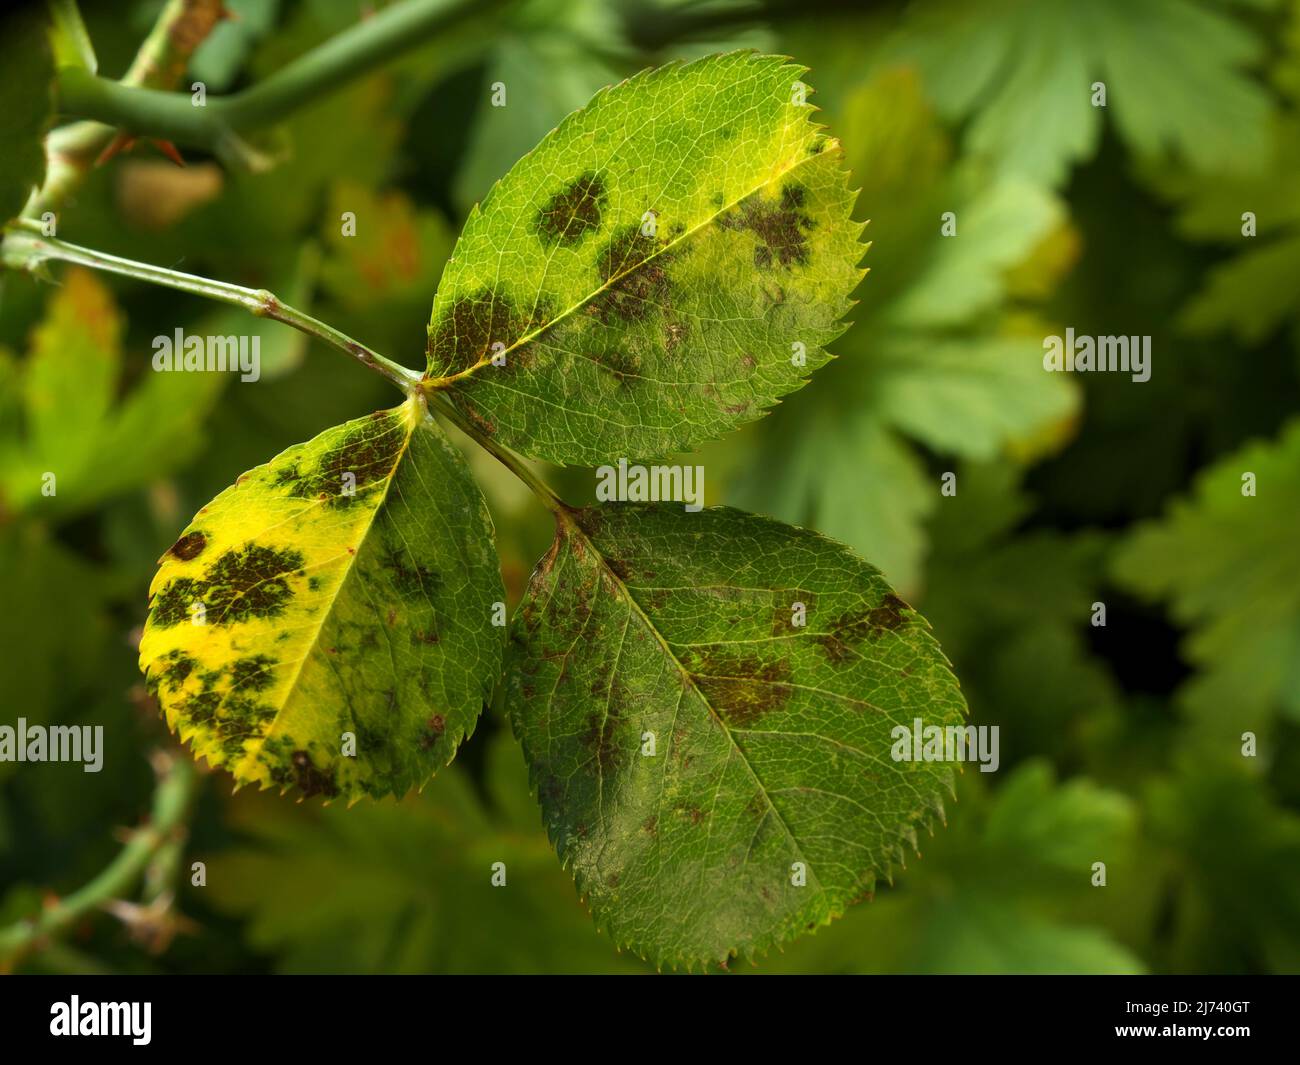 photo shows some leaves of roses infected by blackspot fungus Stock Photo